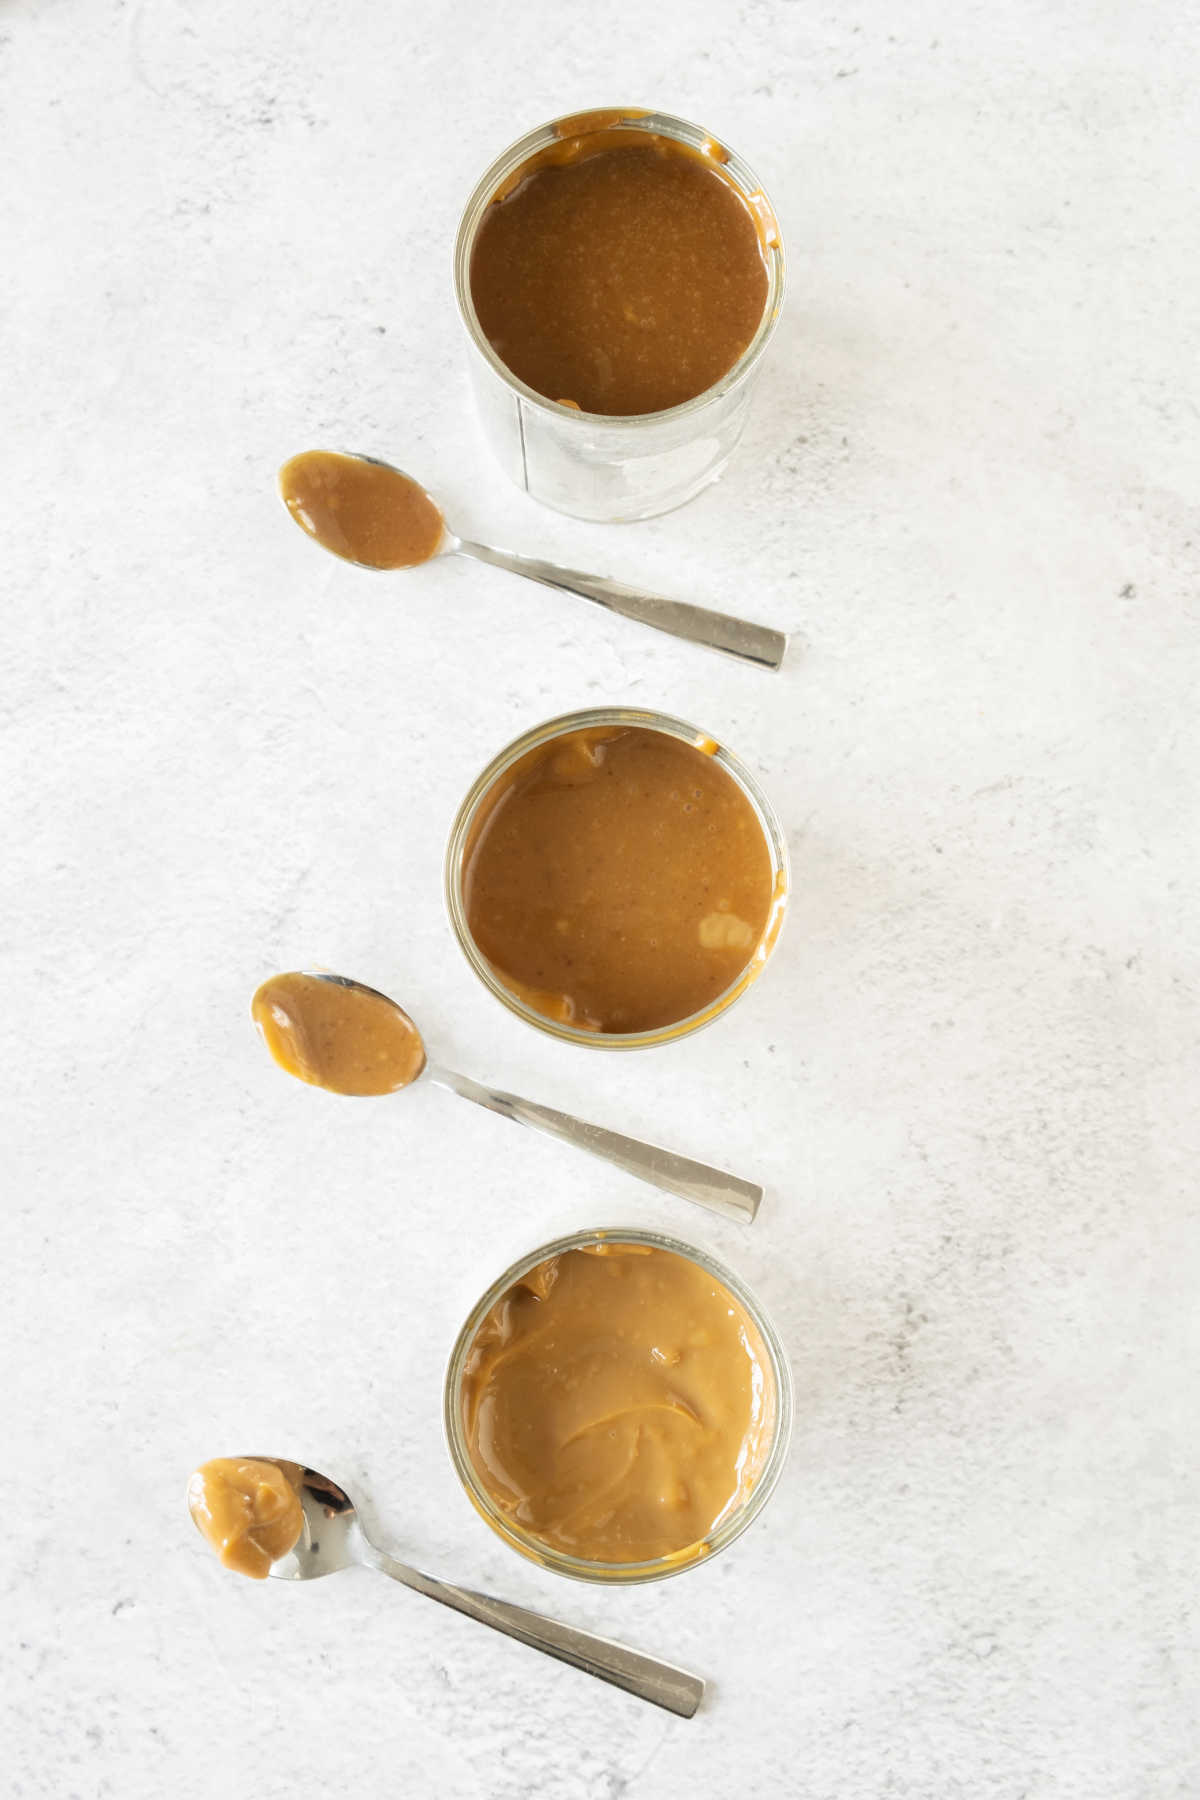 Top view of three cans and spoon with dulce de leche on a light gray surface.